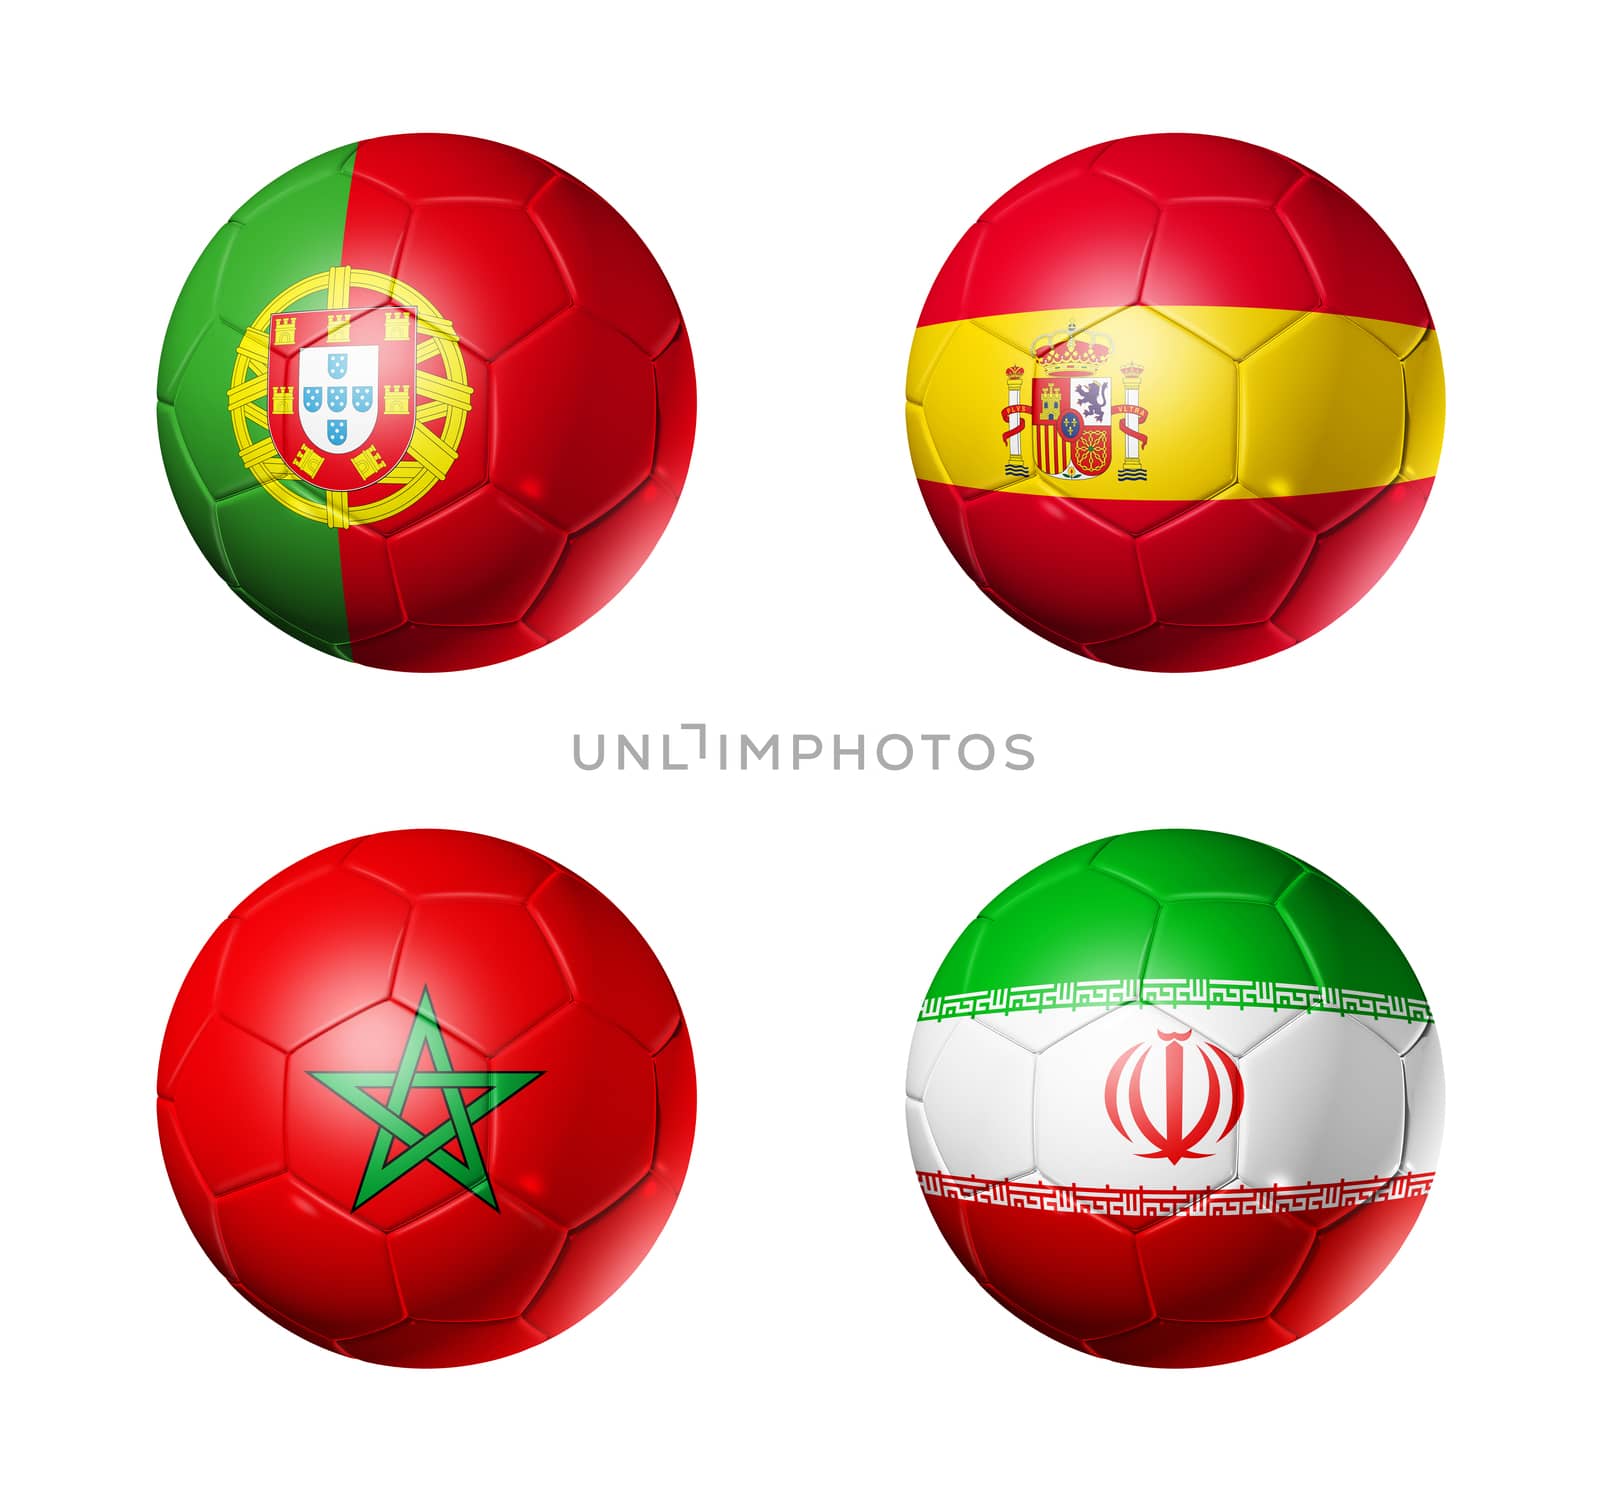 Russia football 2018 group B flags on soccer balls by daboost